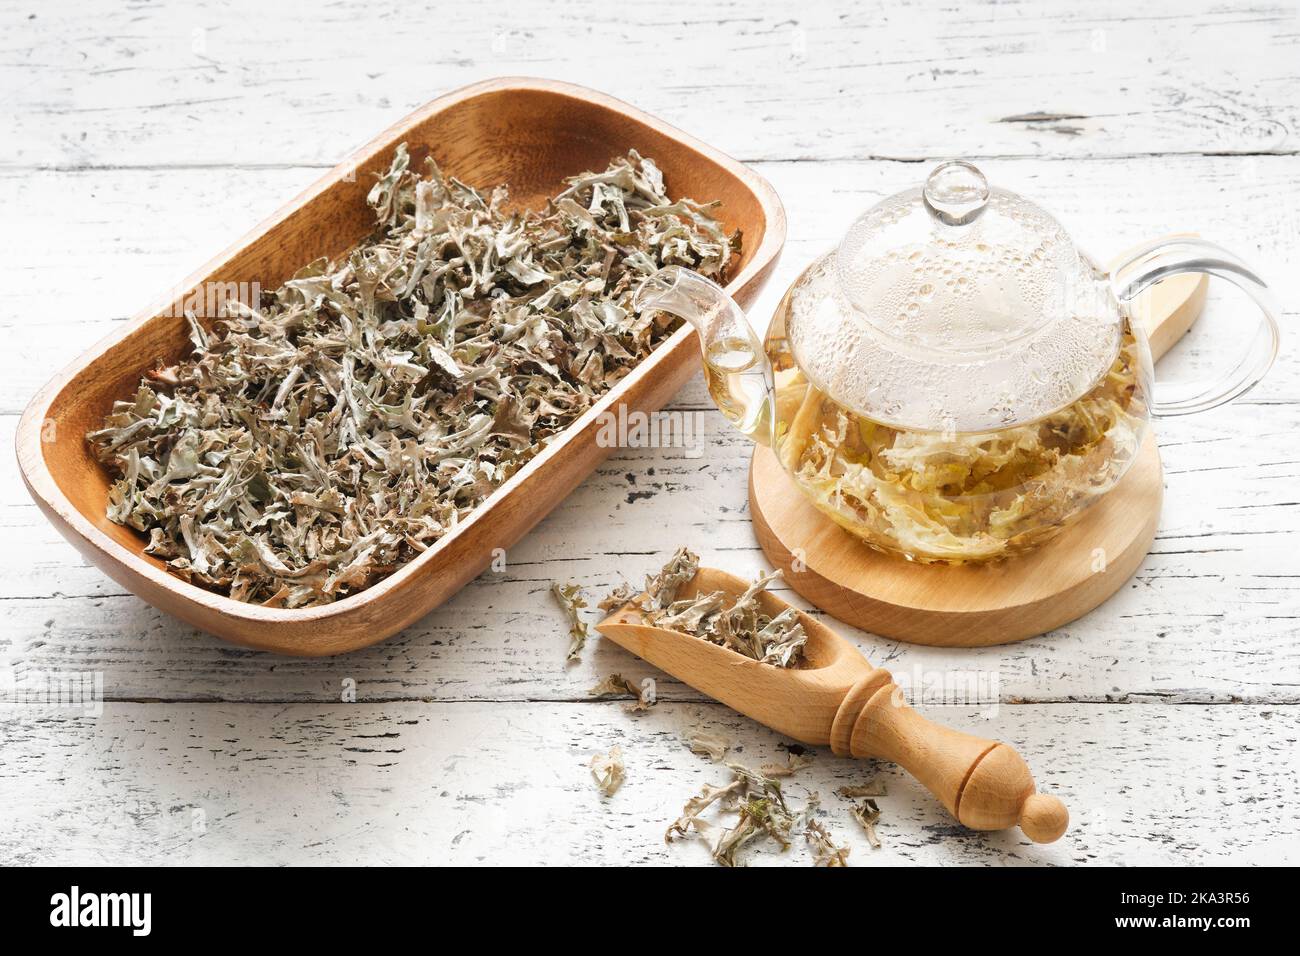 Glass teapot of herbal Icelandic moss tea. Wooden scoop and bowl of dried Iceland moss. Cetraria islandica - latin name of plant. Alternative herbal m Stock Photo